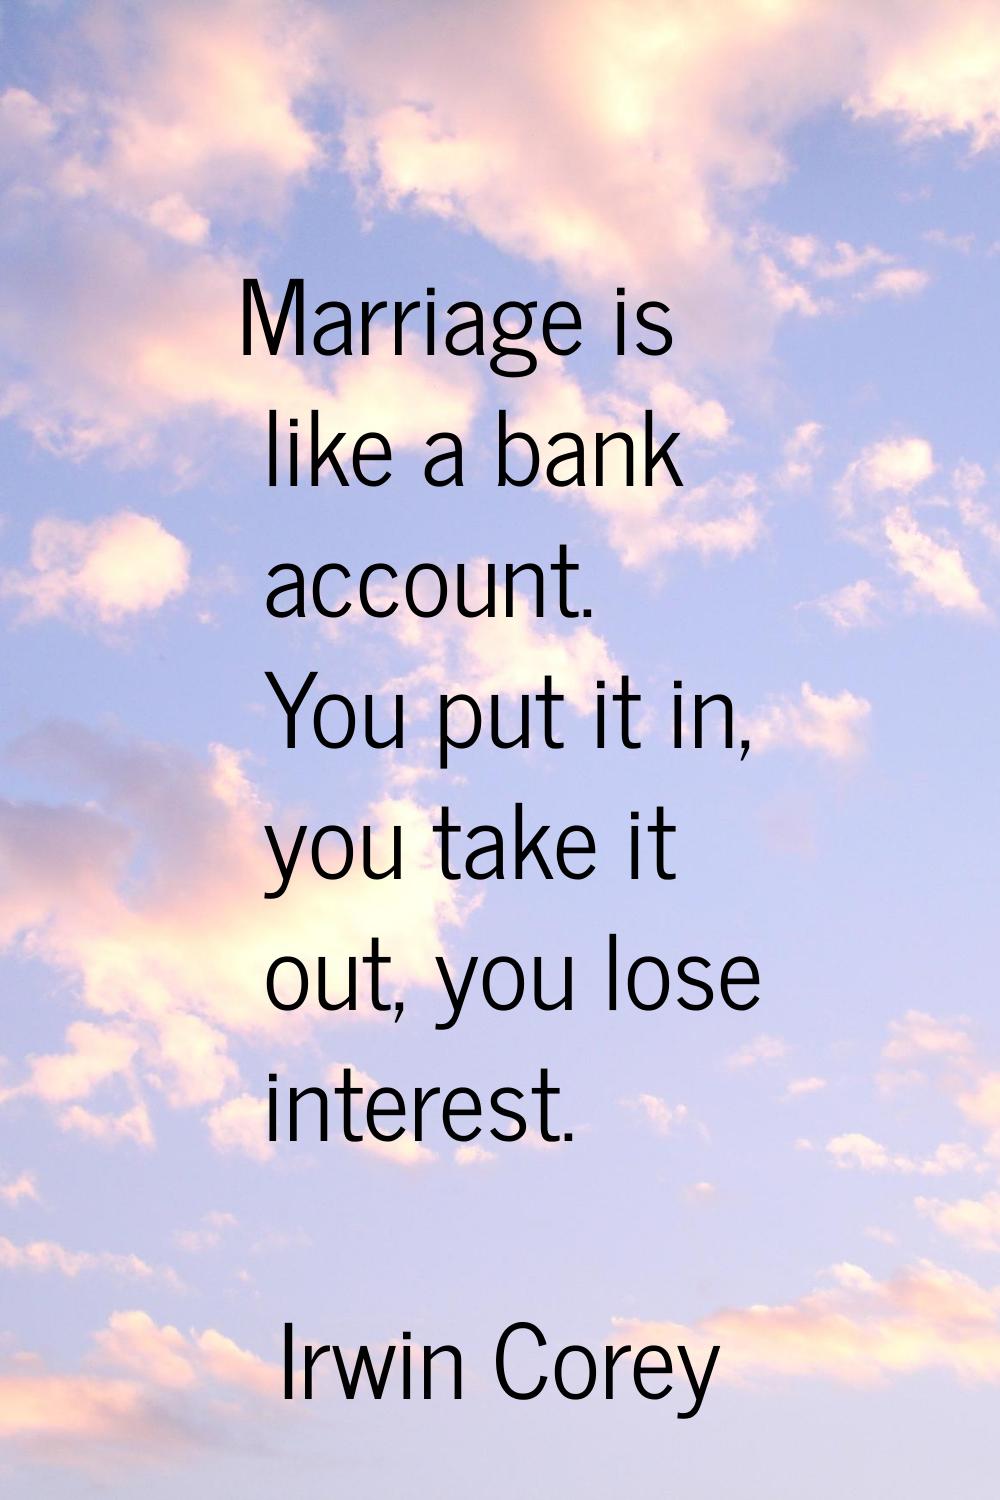 Marriage is like a bank account. You put it in, you take it out, you lose interest.